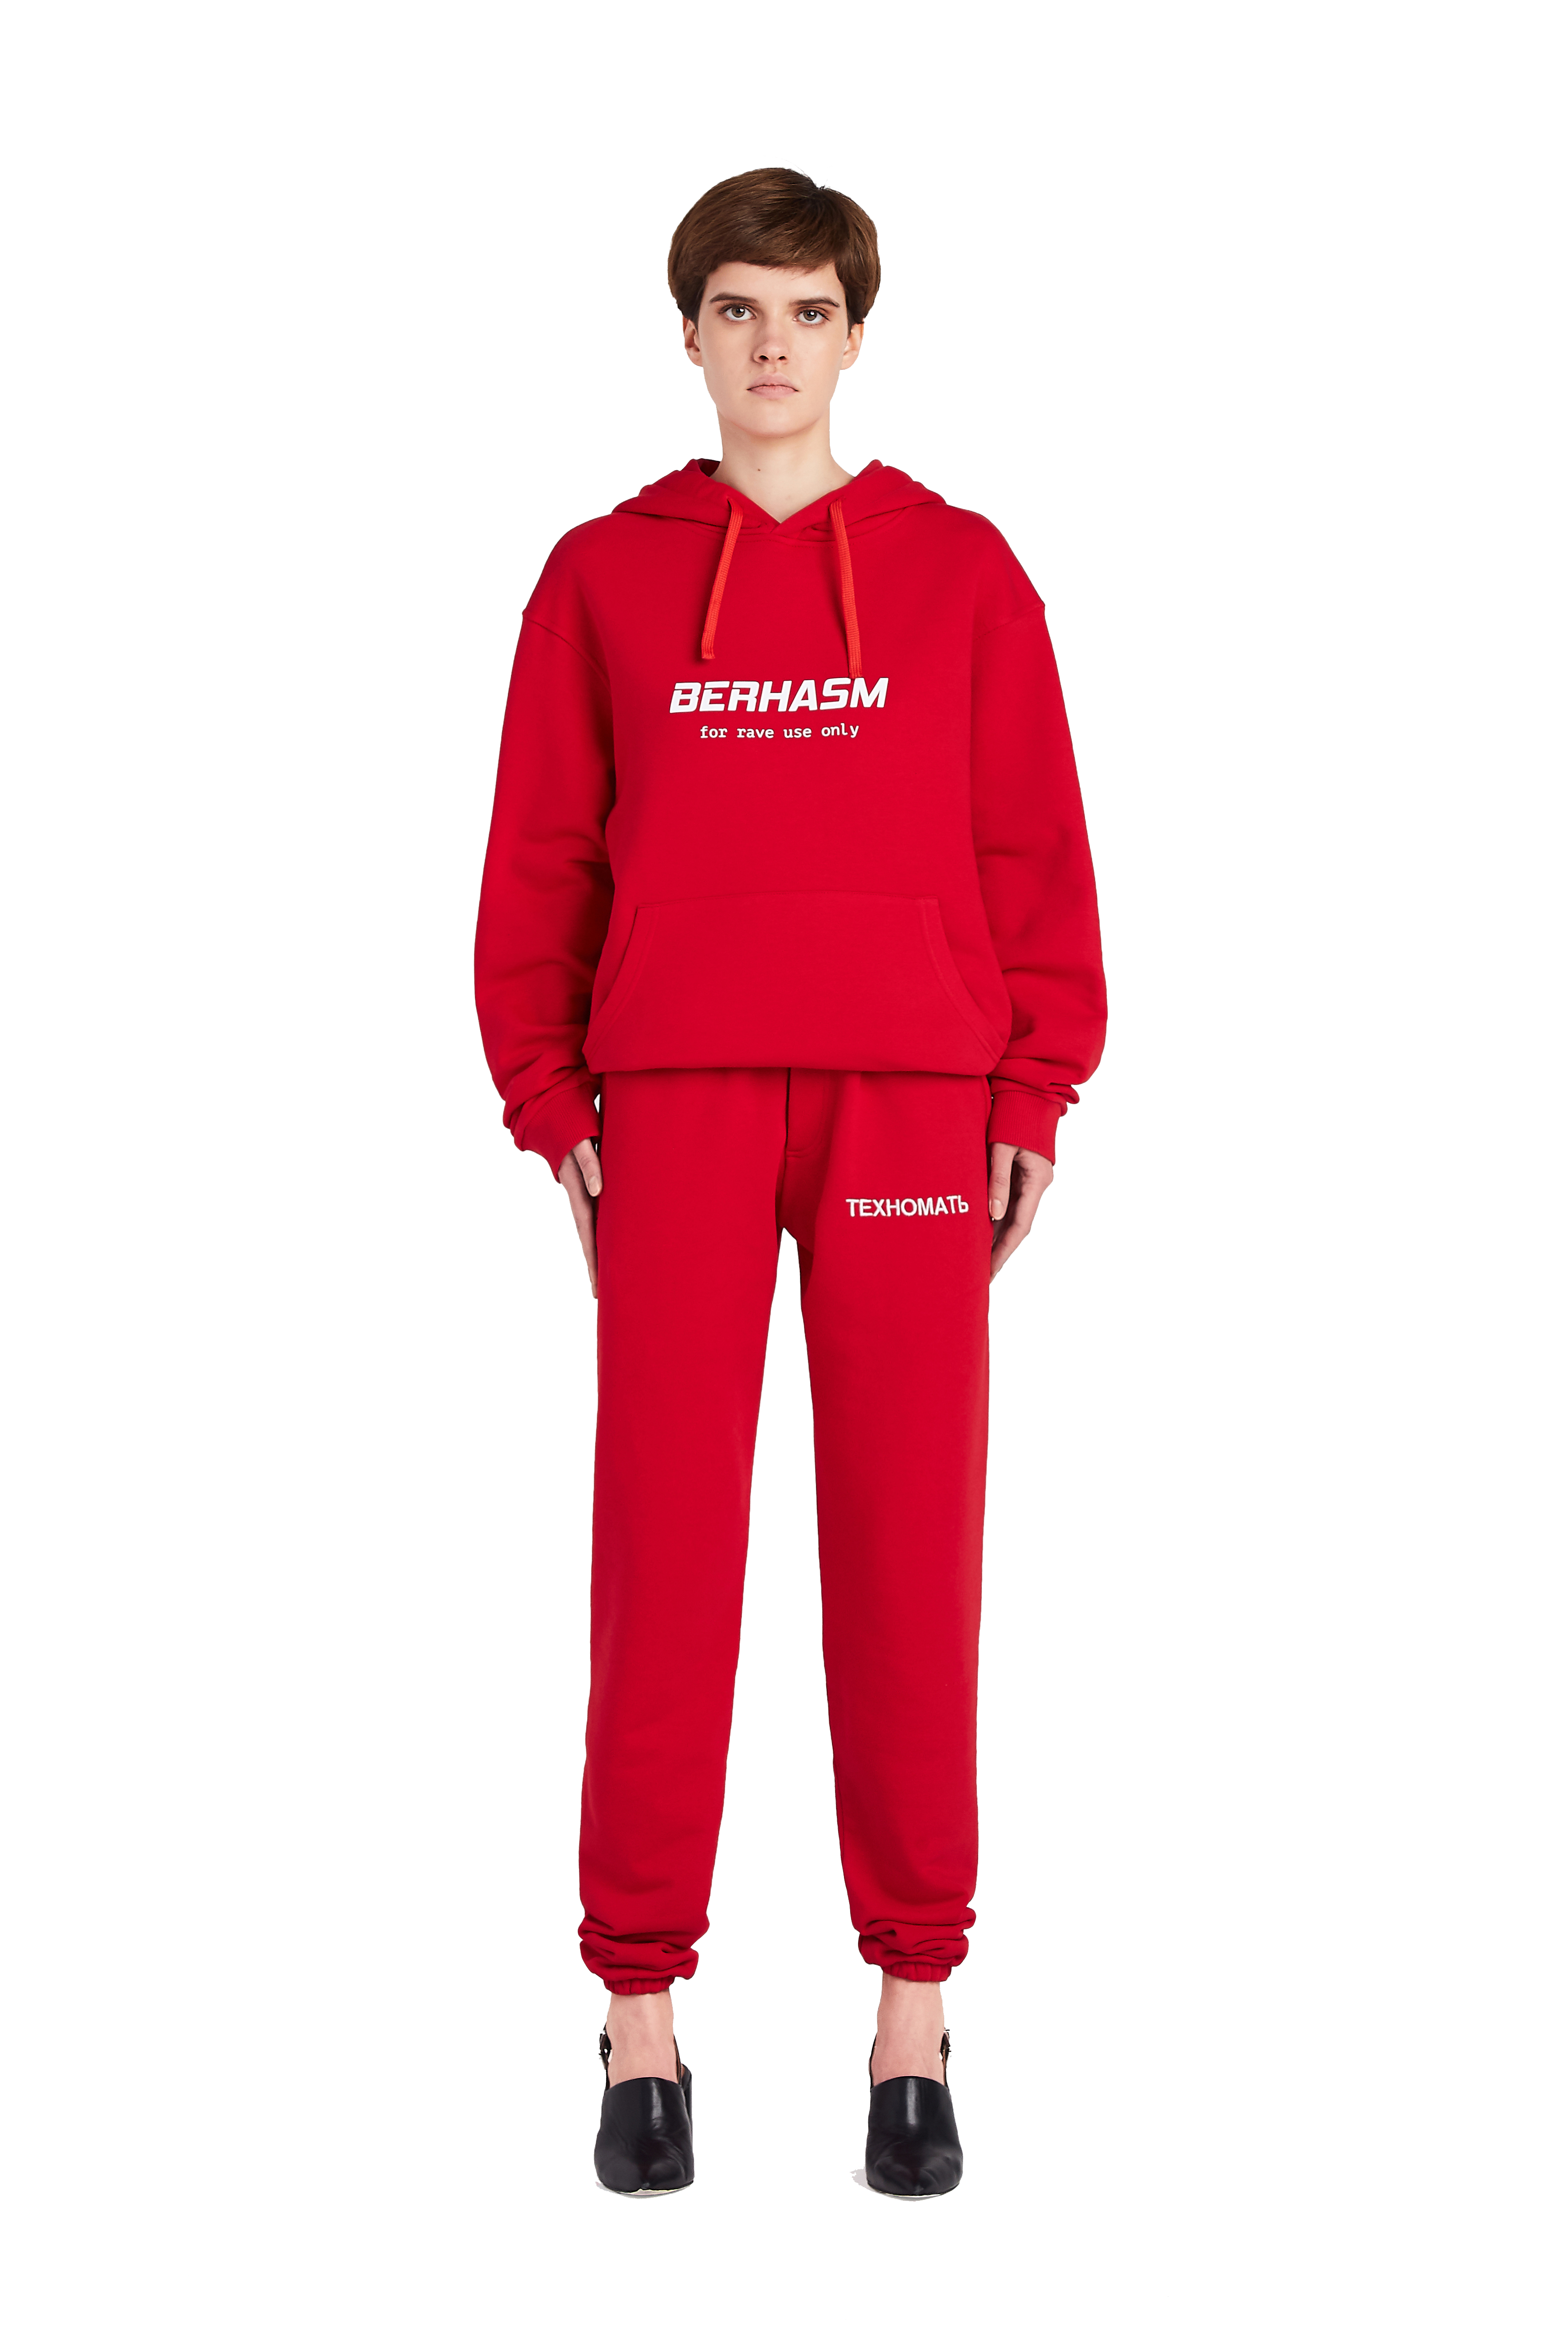 Red hoodie FOR RAVE USE ONLY